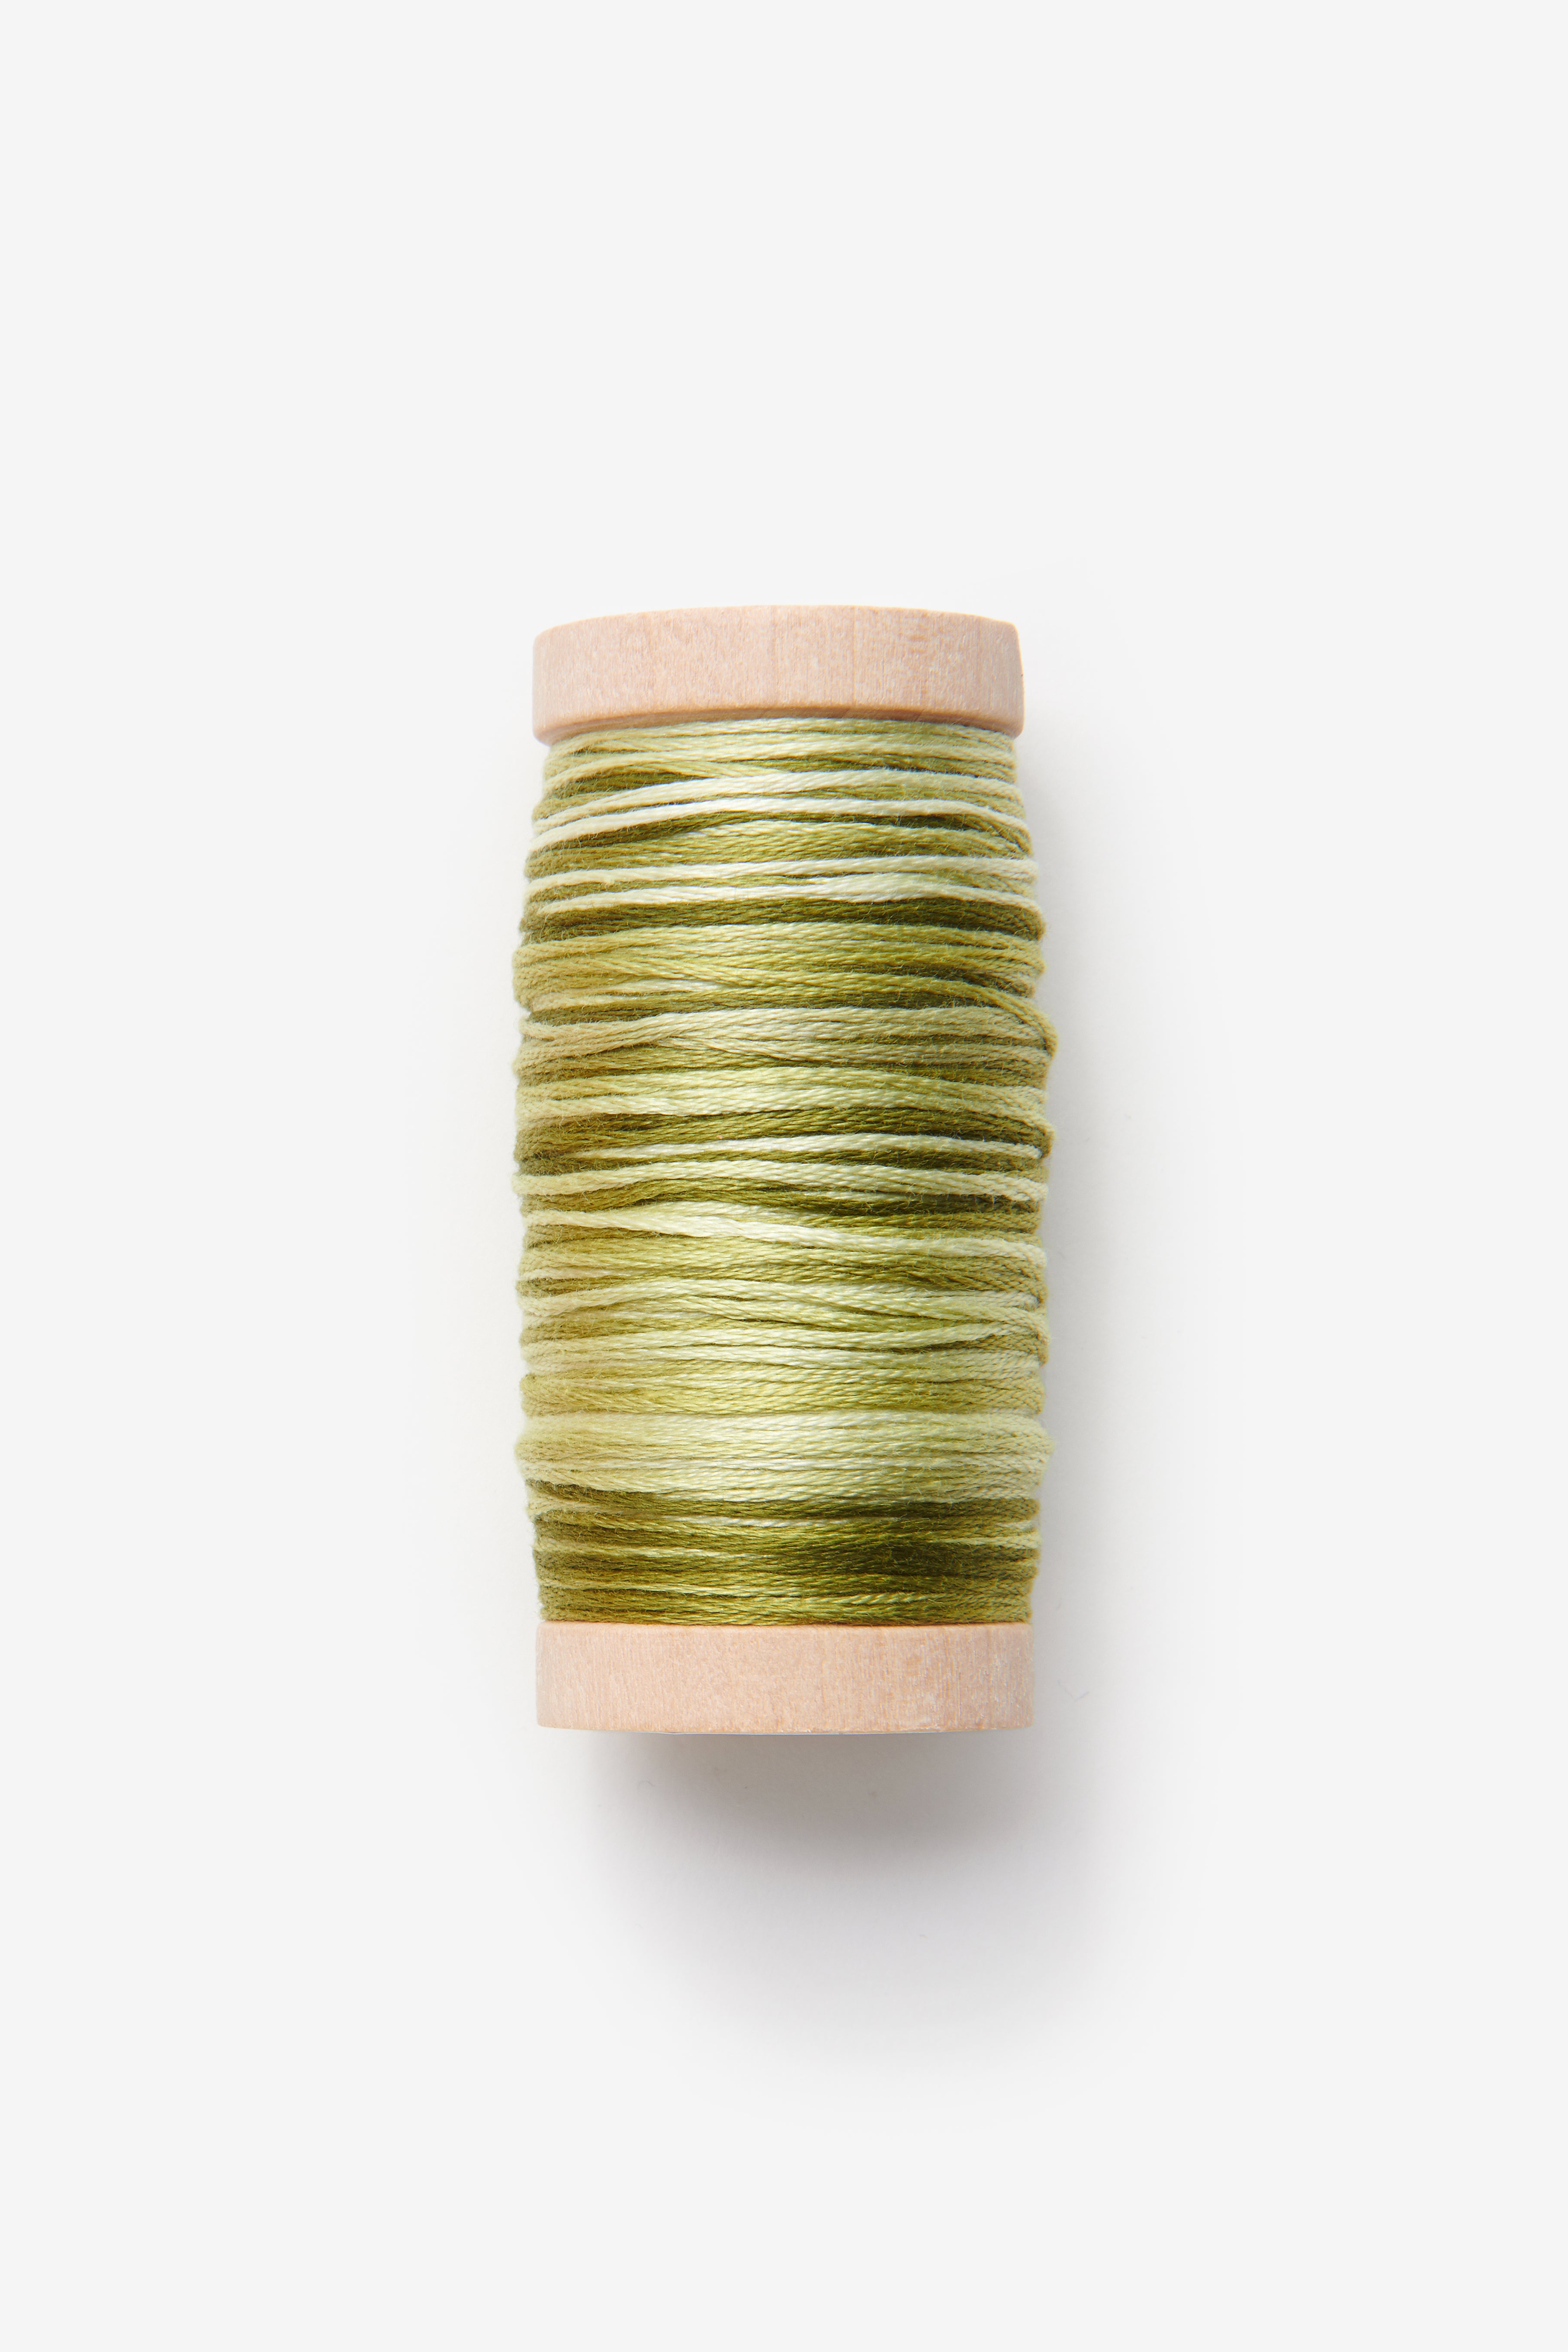 Green variegated embroidery floss on a wooden spool.